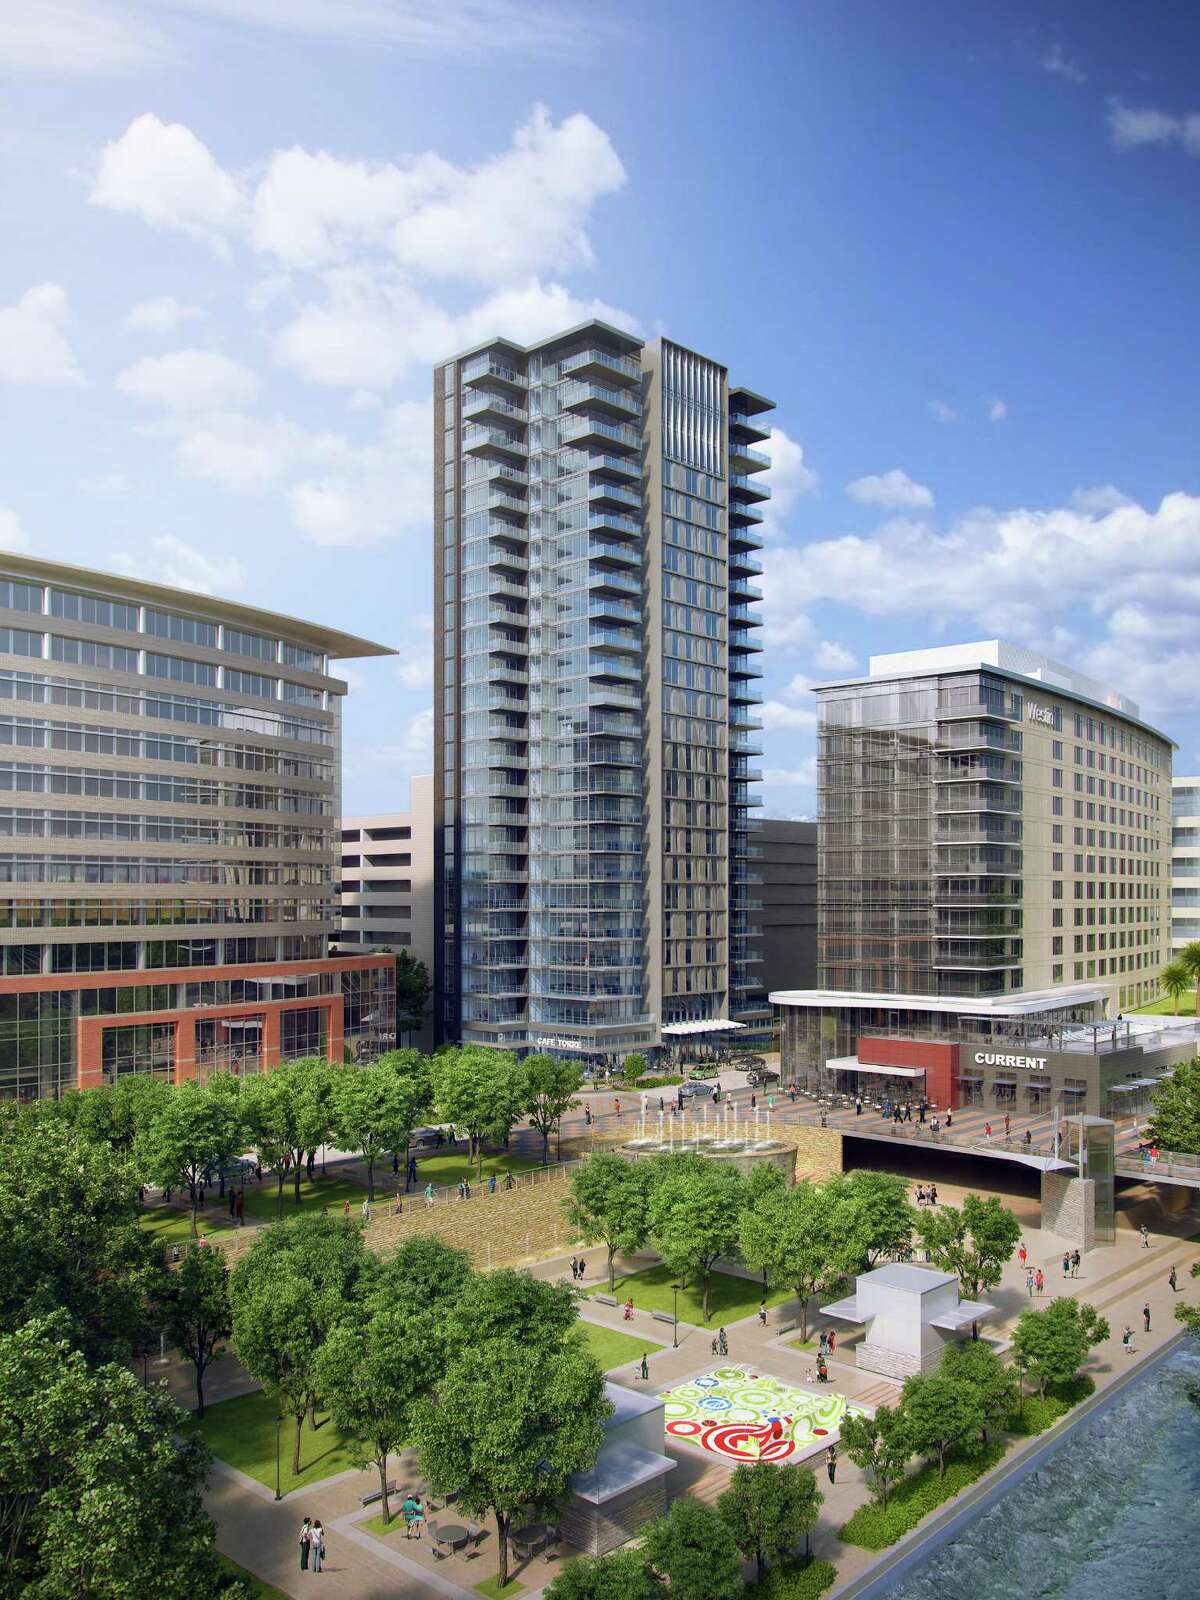 A 23-story luxury condominium called the Treviso at Waterway Square was designed as a slick glass building with a waterfront view near walkable urban amenities, an embodiment of The Woodlandsâ âlive, work, play and stayâ concept. But the property will remain undeveloped for the time being.